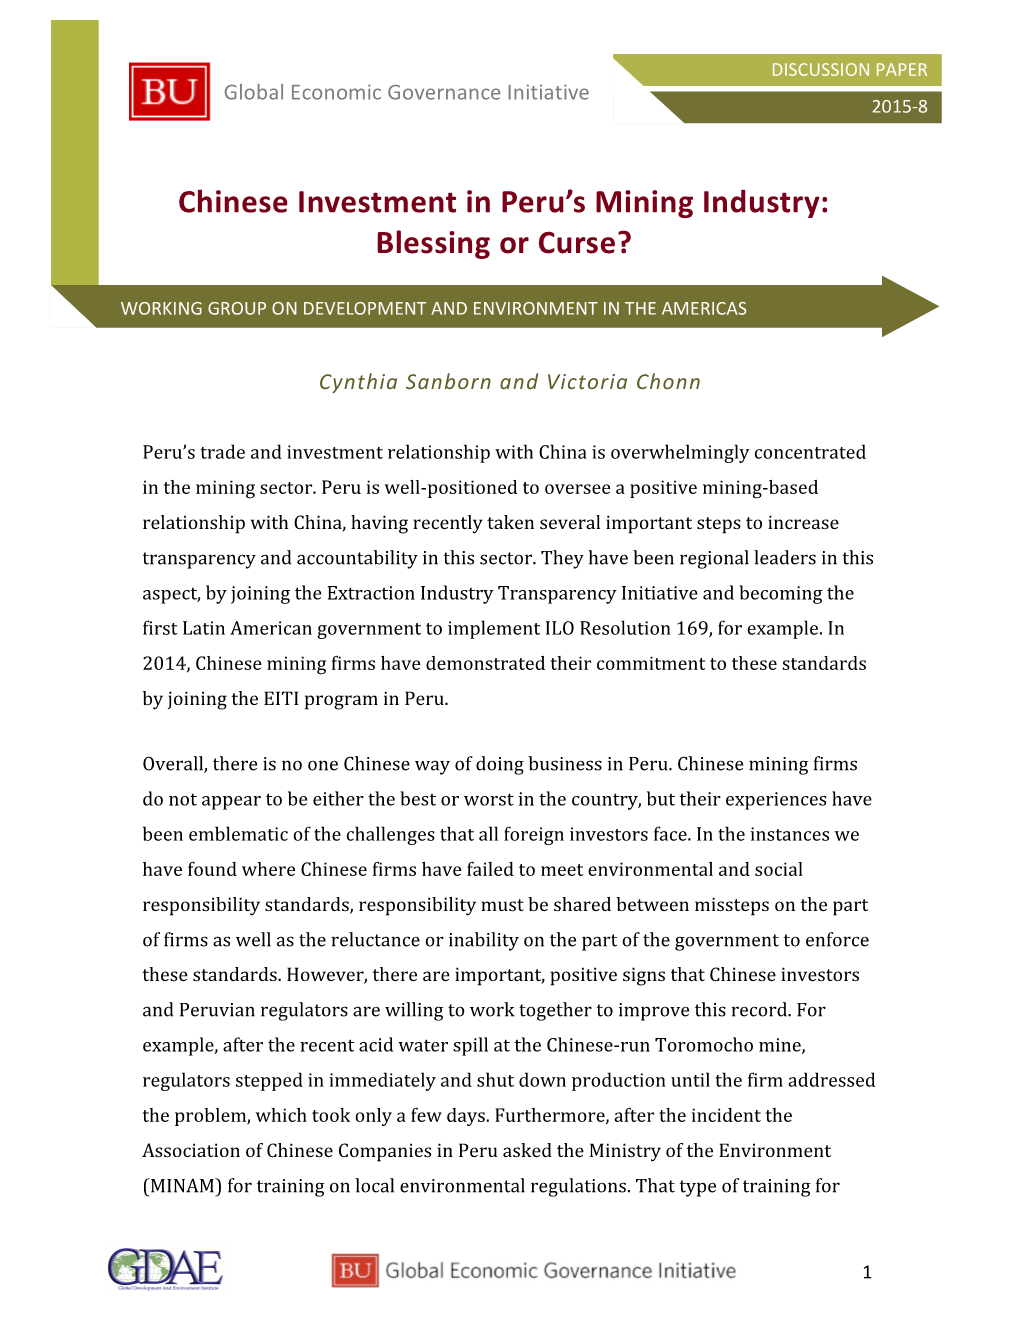 Chinese Investment in Peru's Mining Industry: Blessing Or Curse?